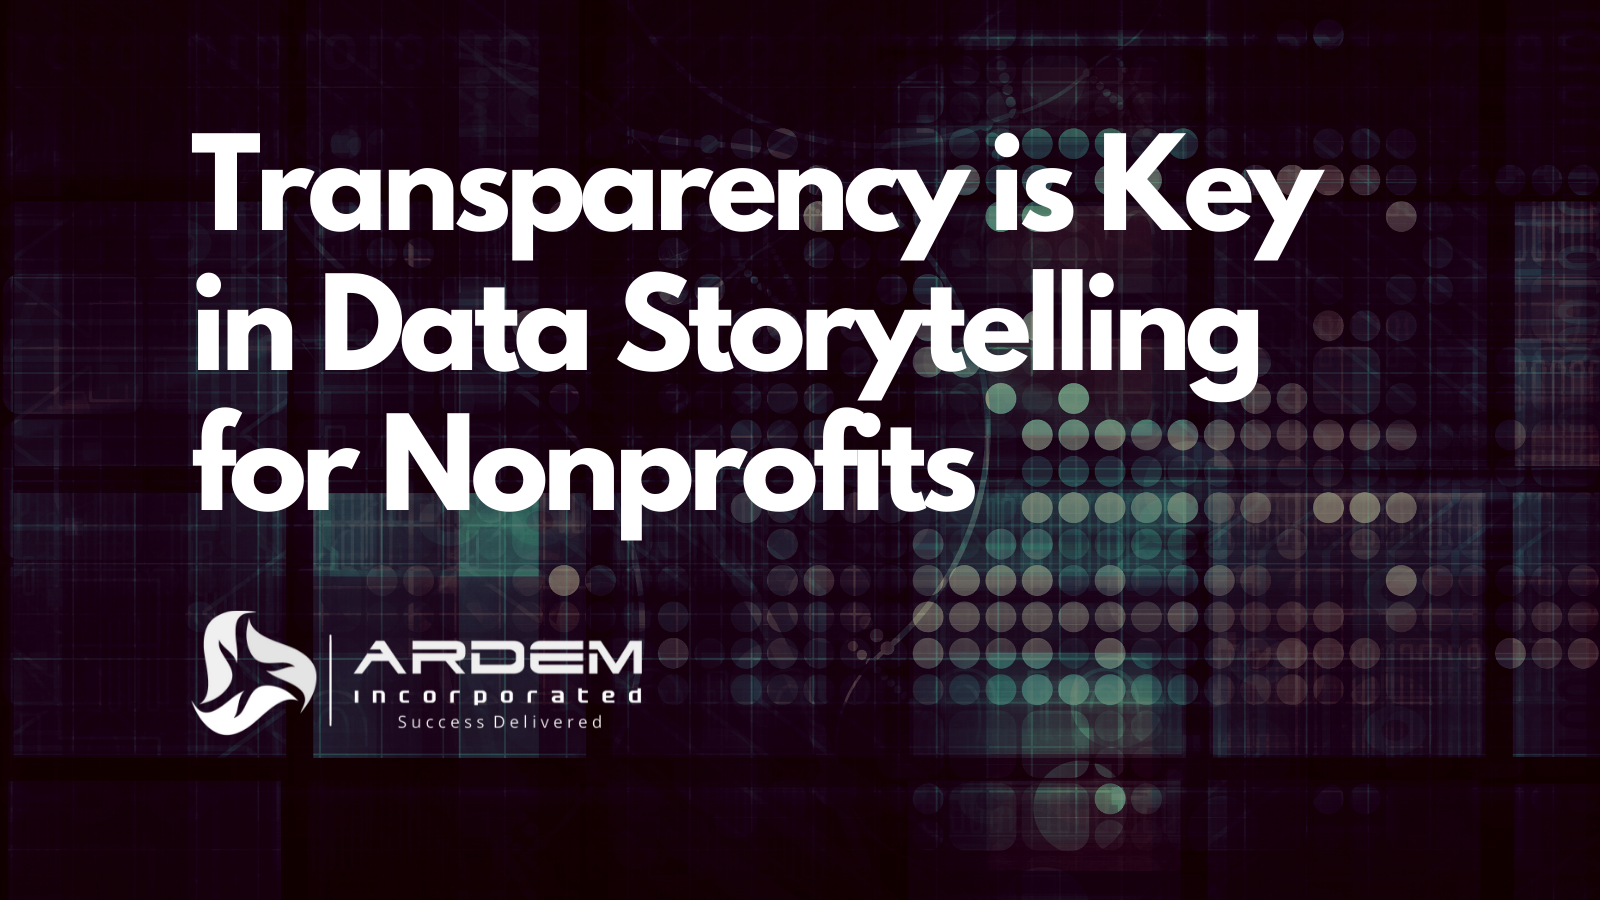 nonprofits data storytelling transparency outsourcing blog